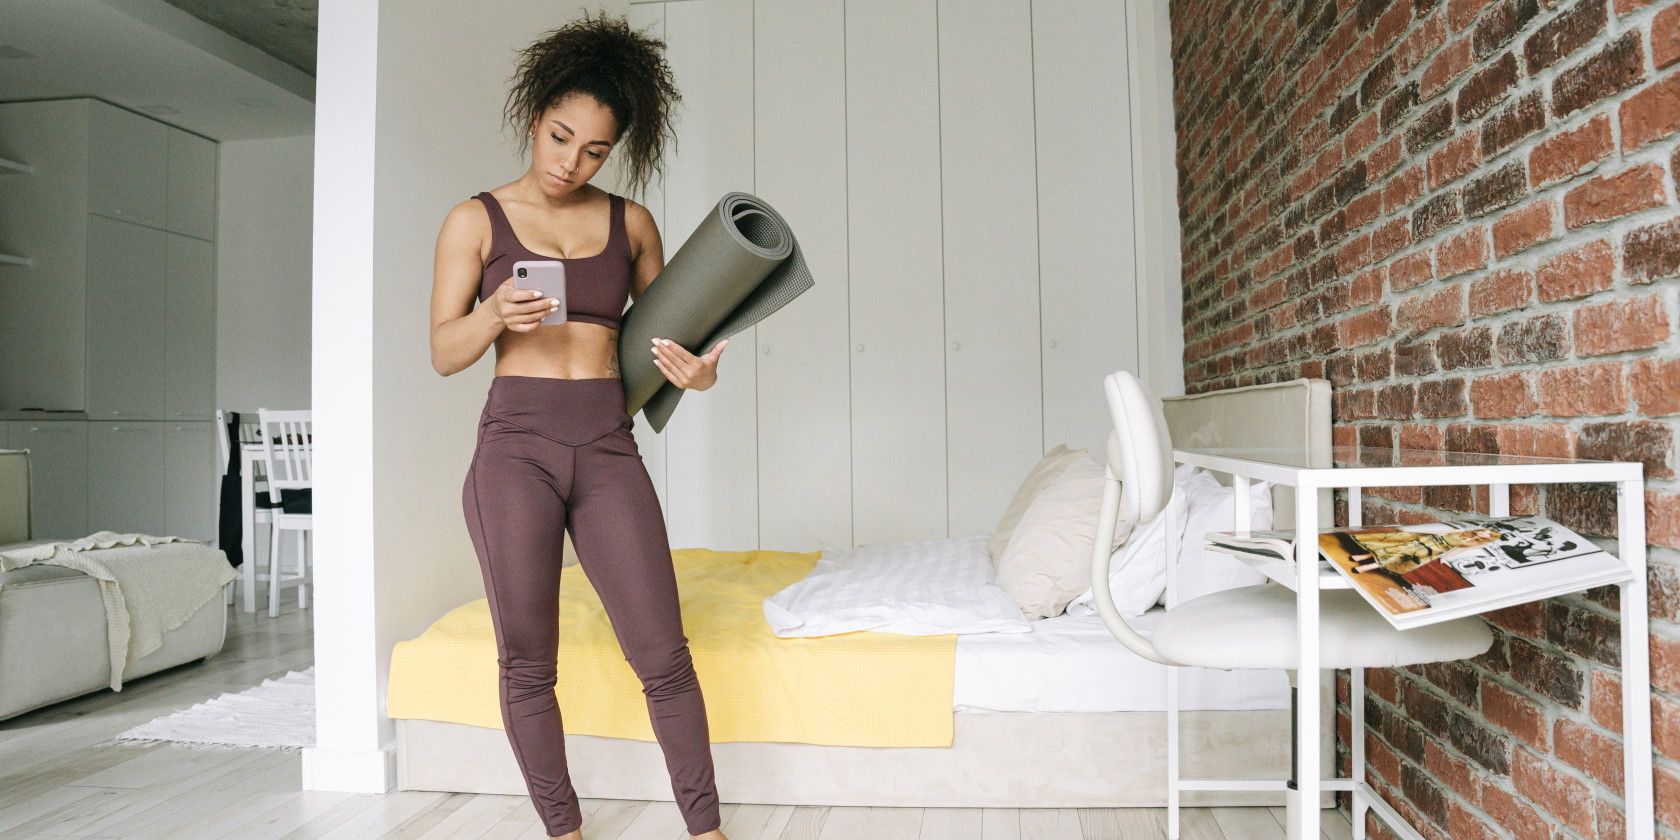 woman standing in bedroom holding exercise mat and using smartphone